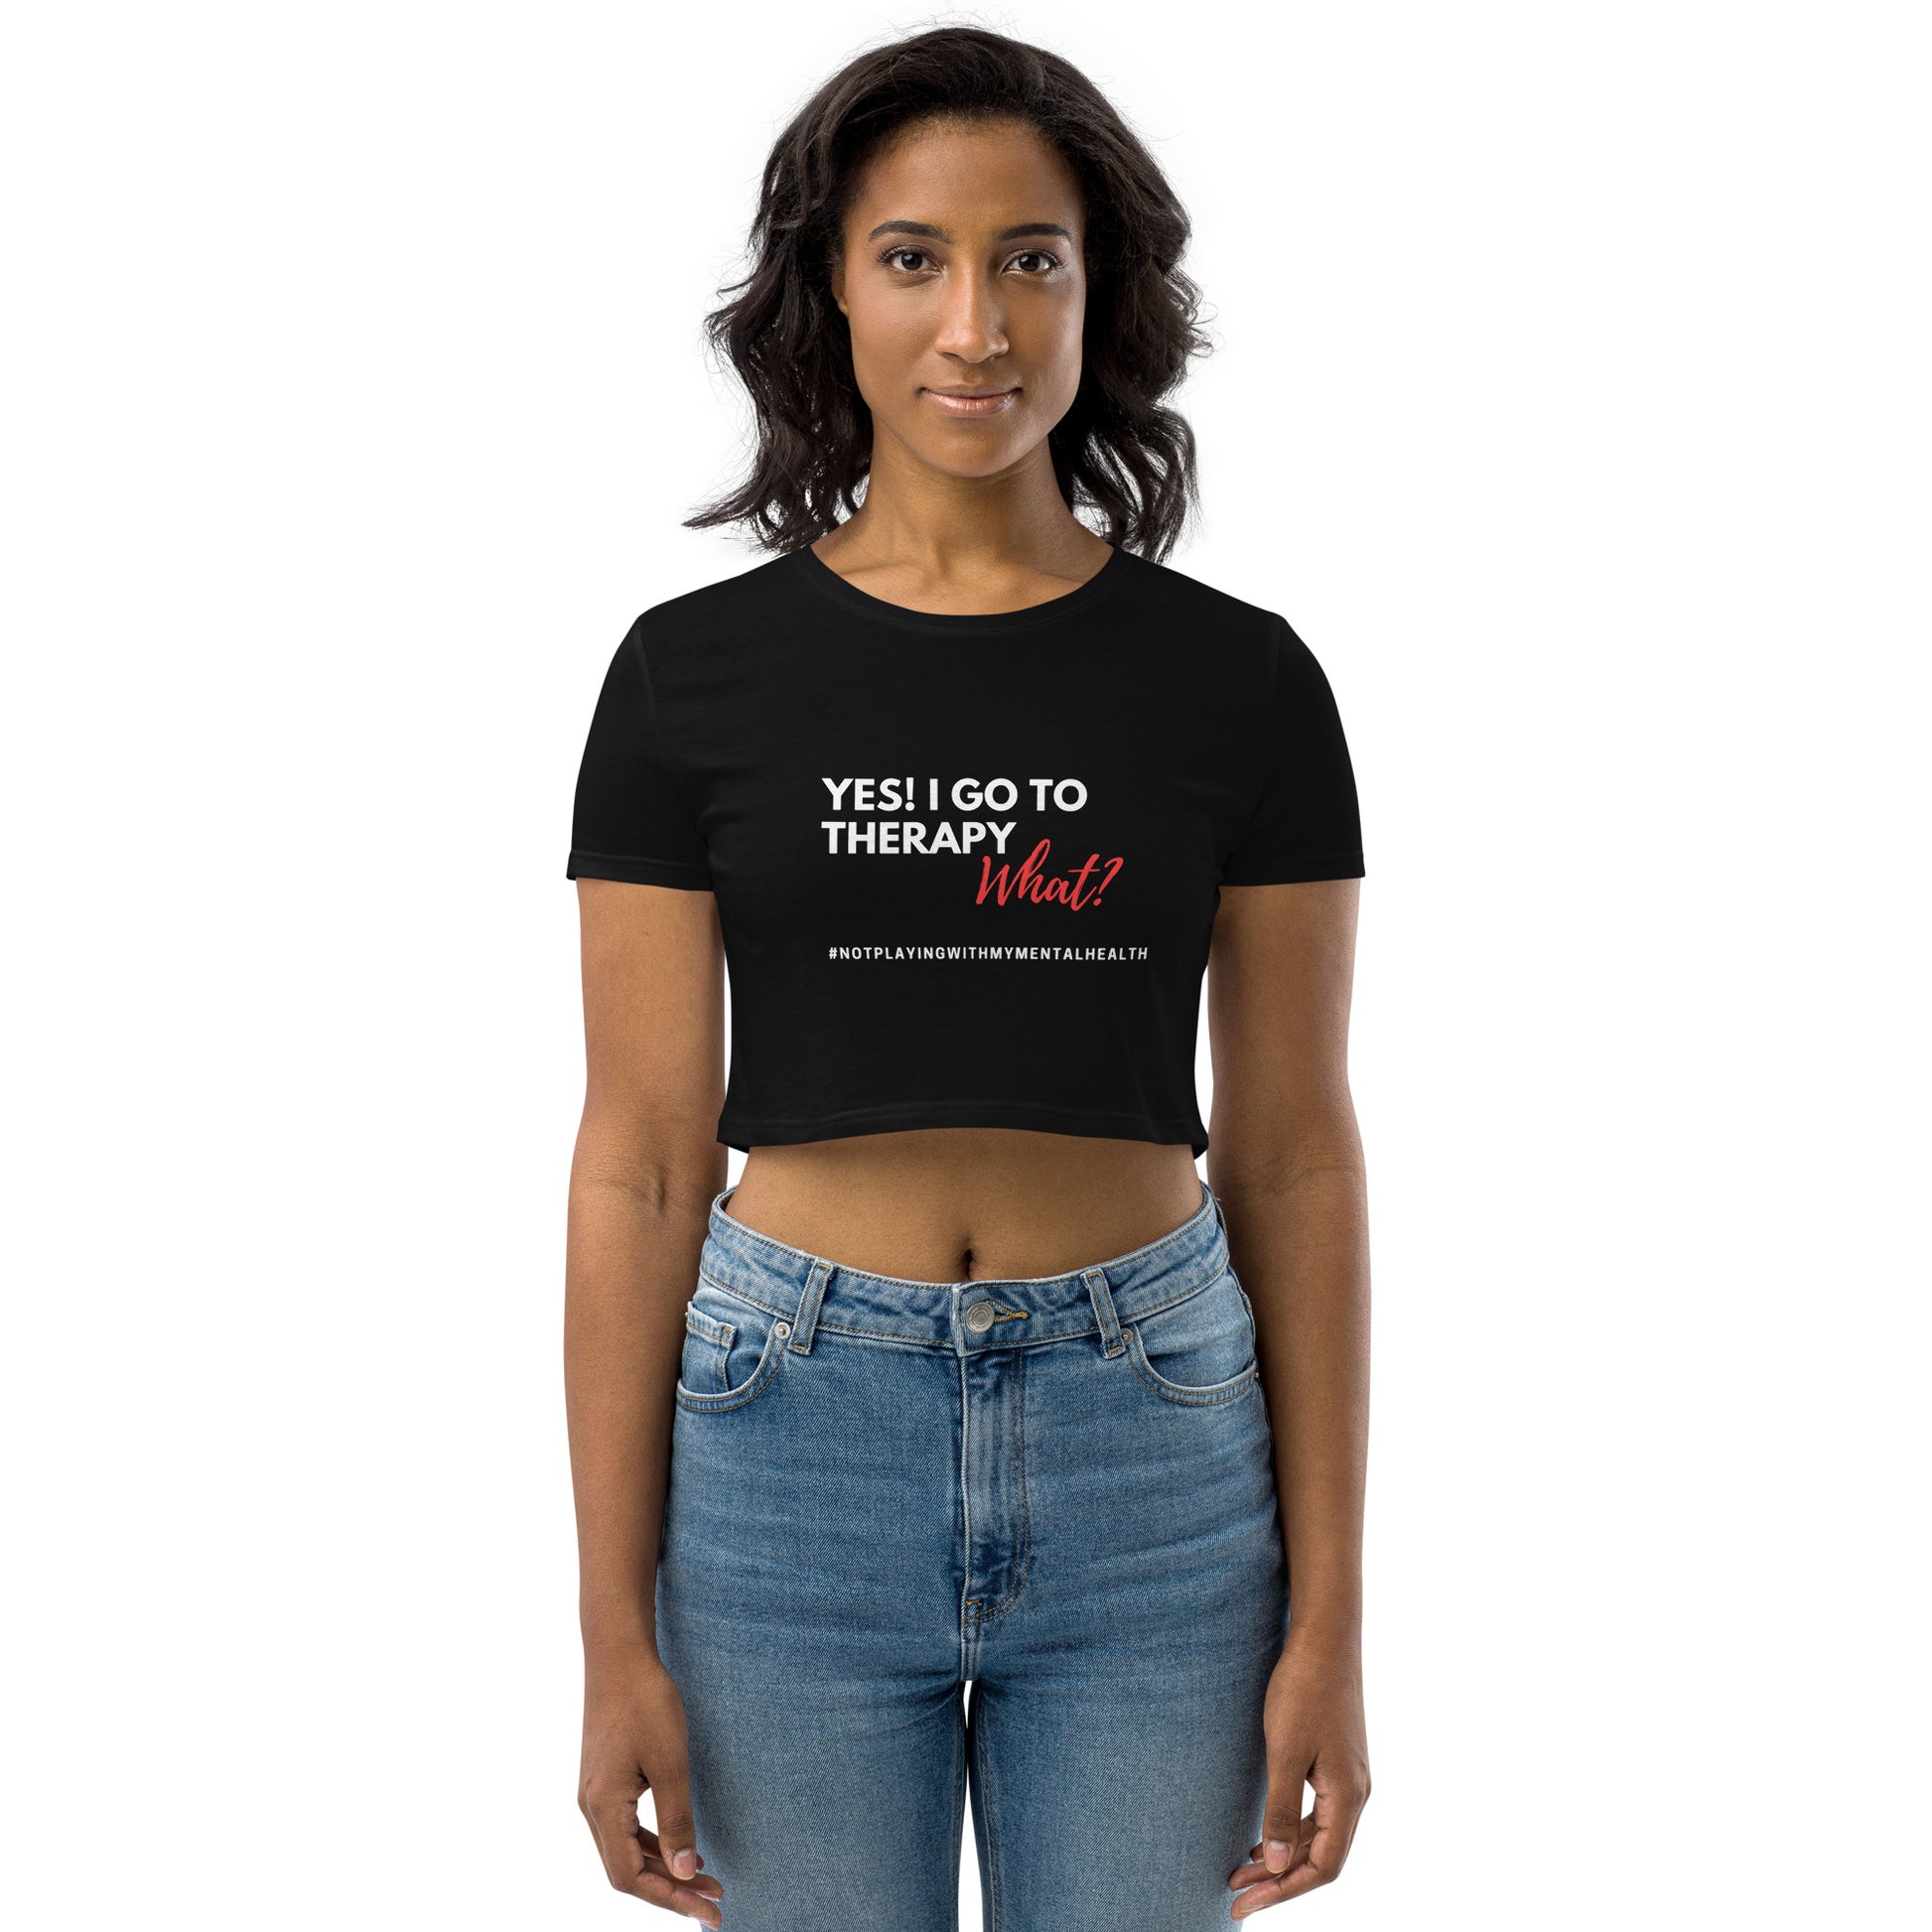 I Go to Therapy Crop Top